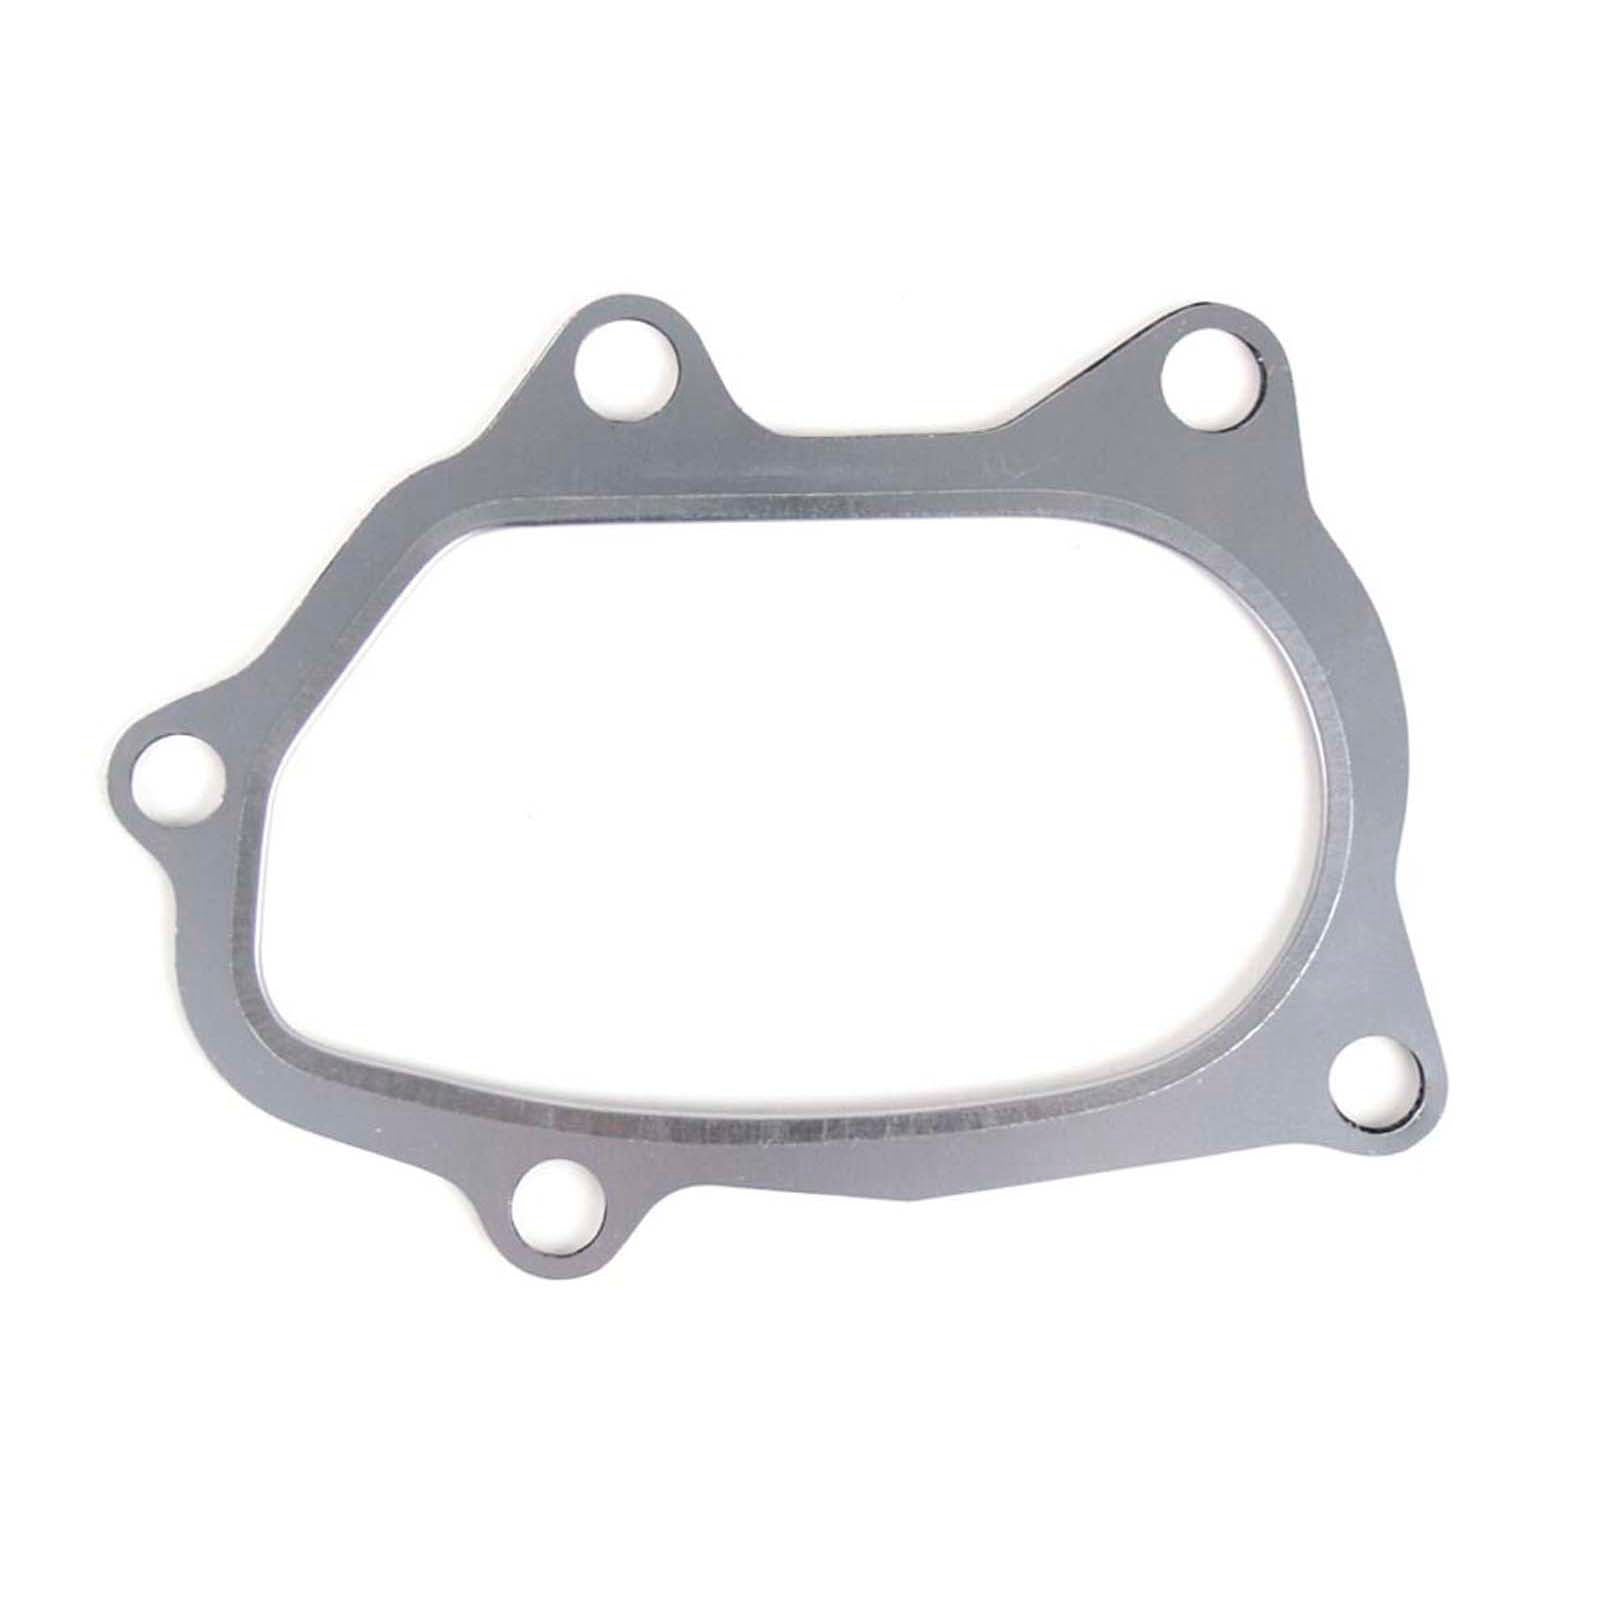 GRM028001 GrimmSpeed Turbo to Downpipe Gasket - 2015+ STI,